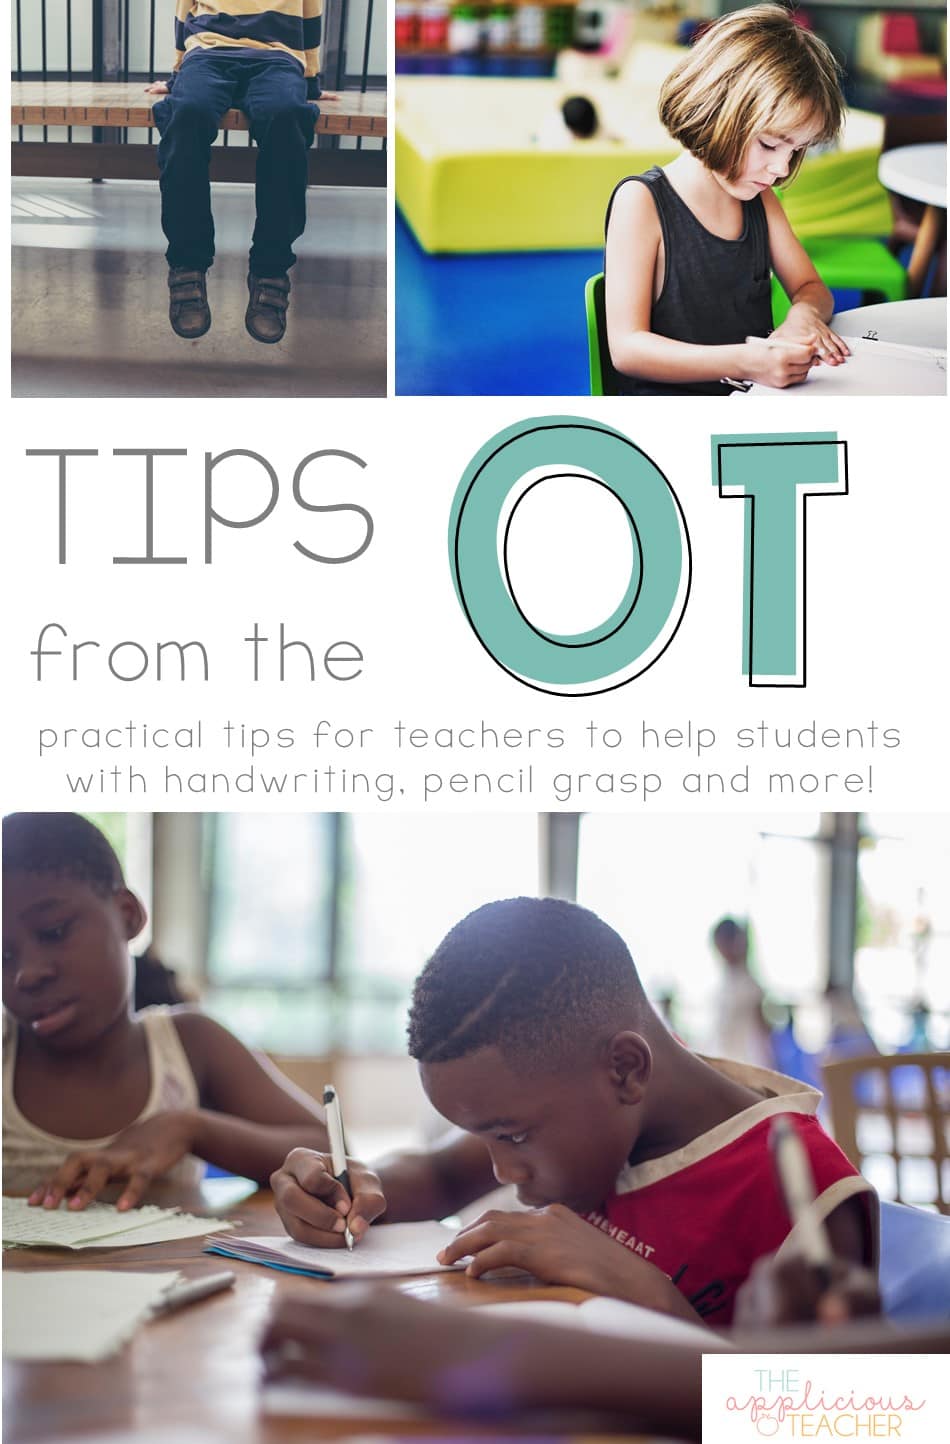 Tips from the OT for classroom teachers. Great post outlining how to help students with terrible handwriting or poor pencil grips. 